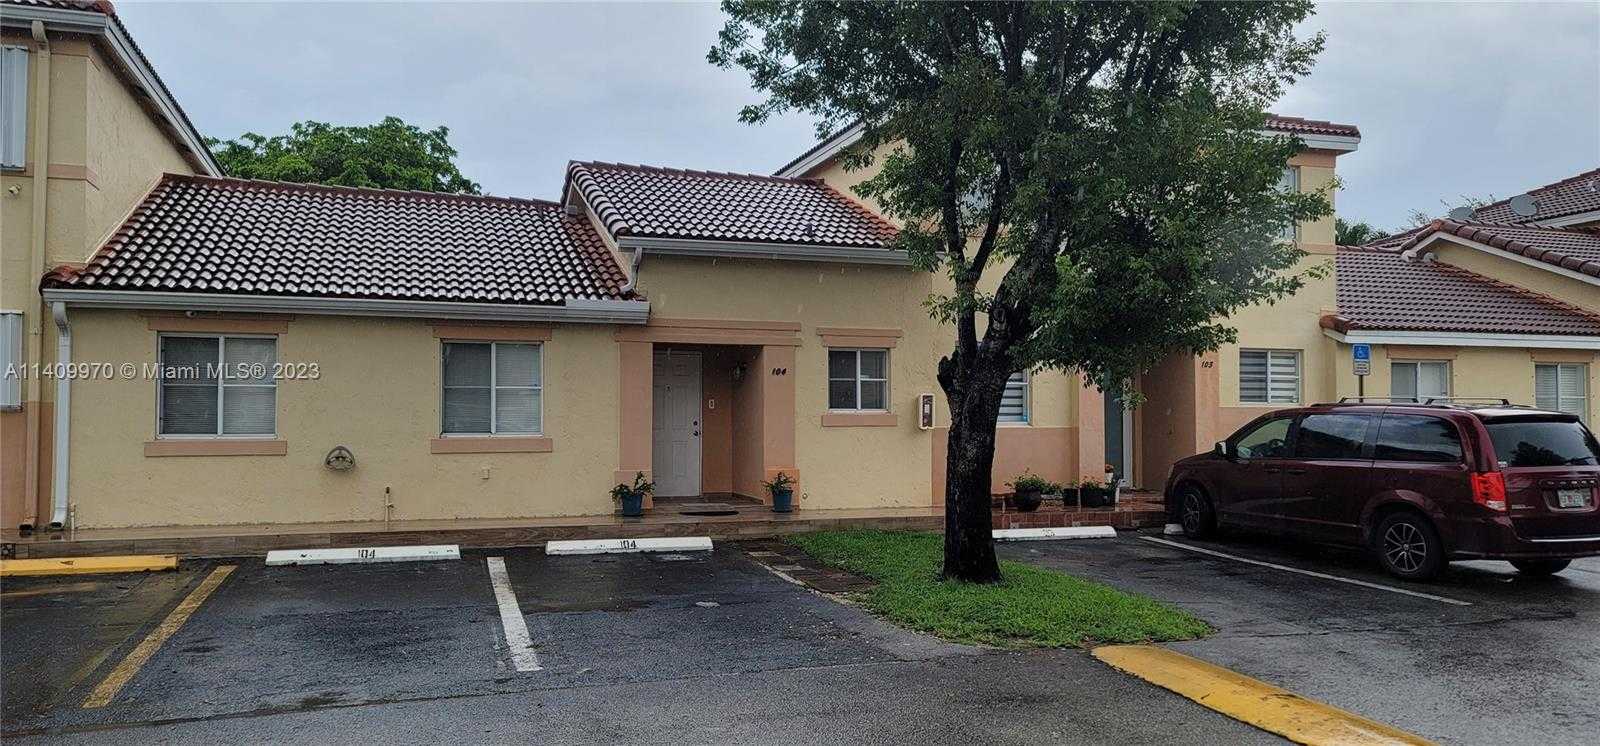 View Sweetwater, FL 33172 condo